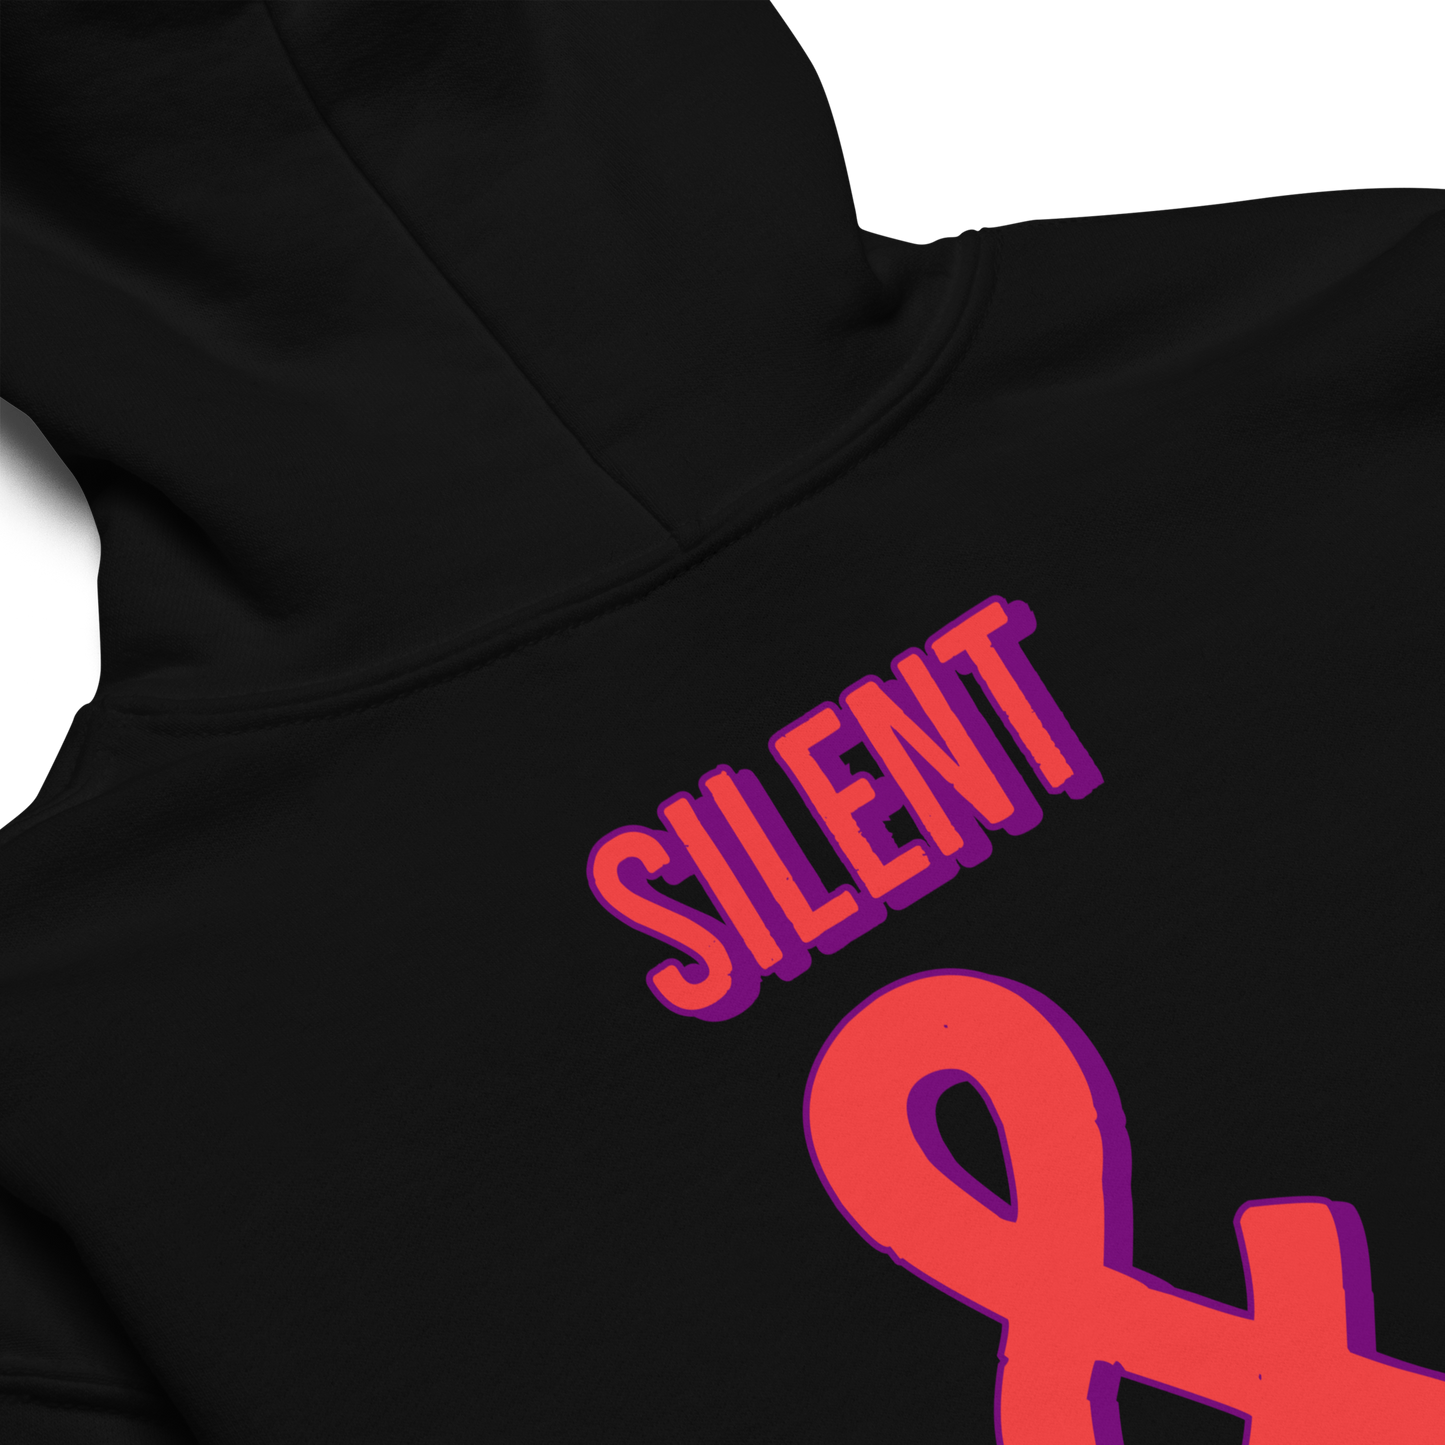 Youth "Silent & Working" hoodie by Novelist